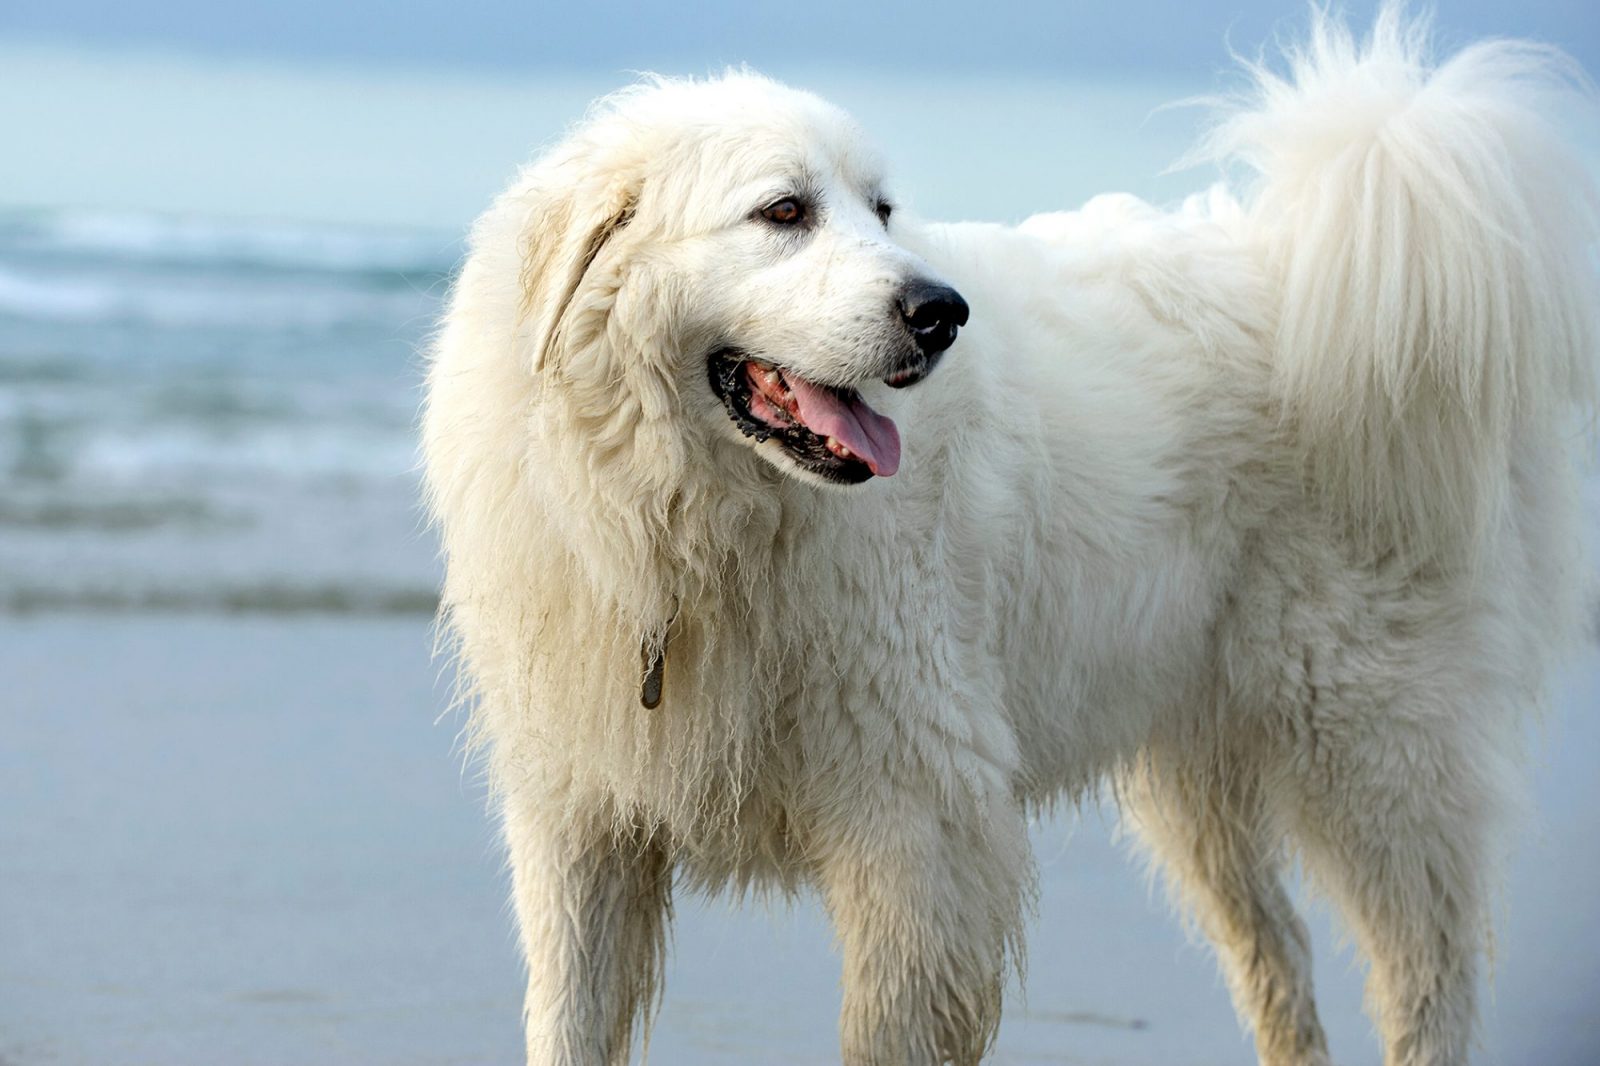 Can You Pass This Geography Quiz Where Every Question Comes With a 🐶 Dog-Related Clue? Pyrenean Mountain Dog